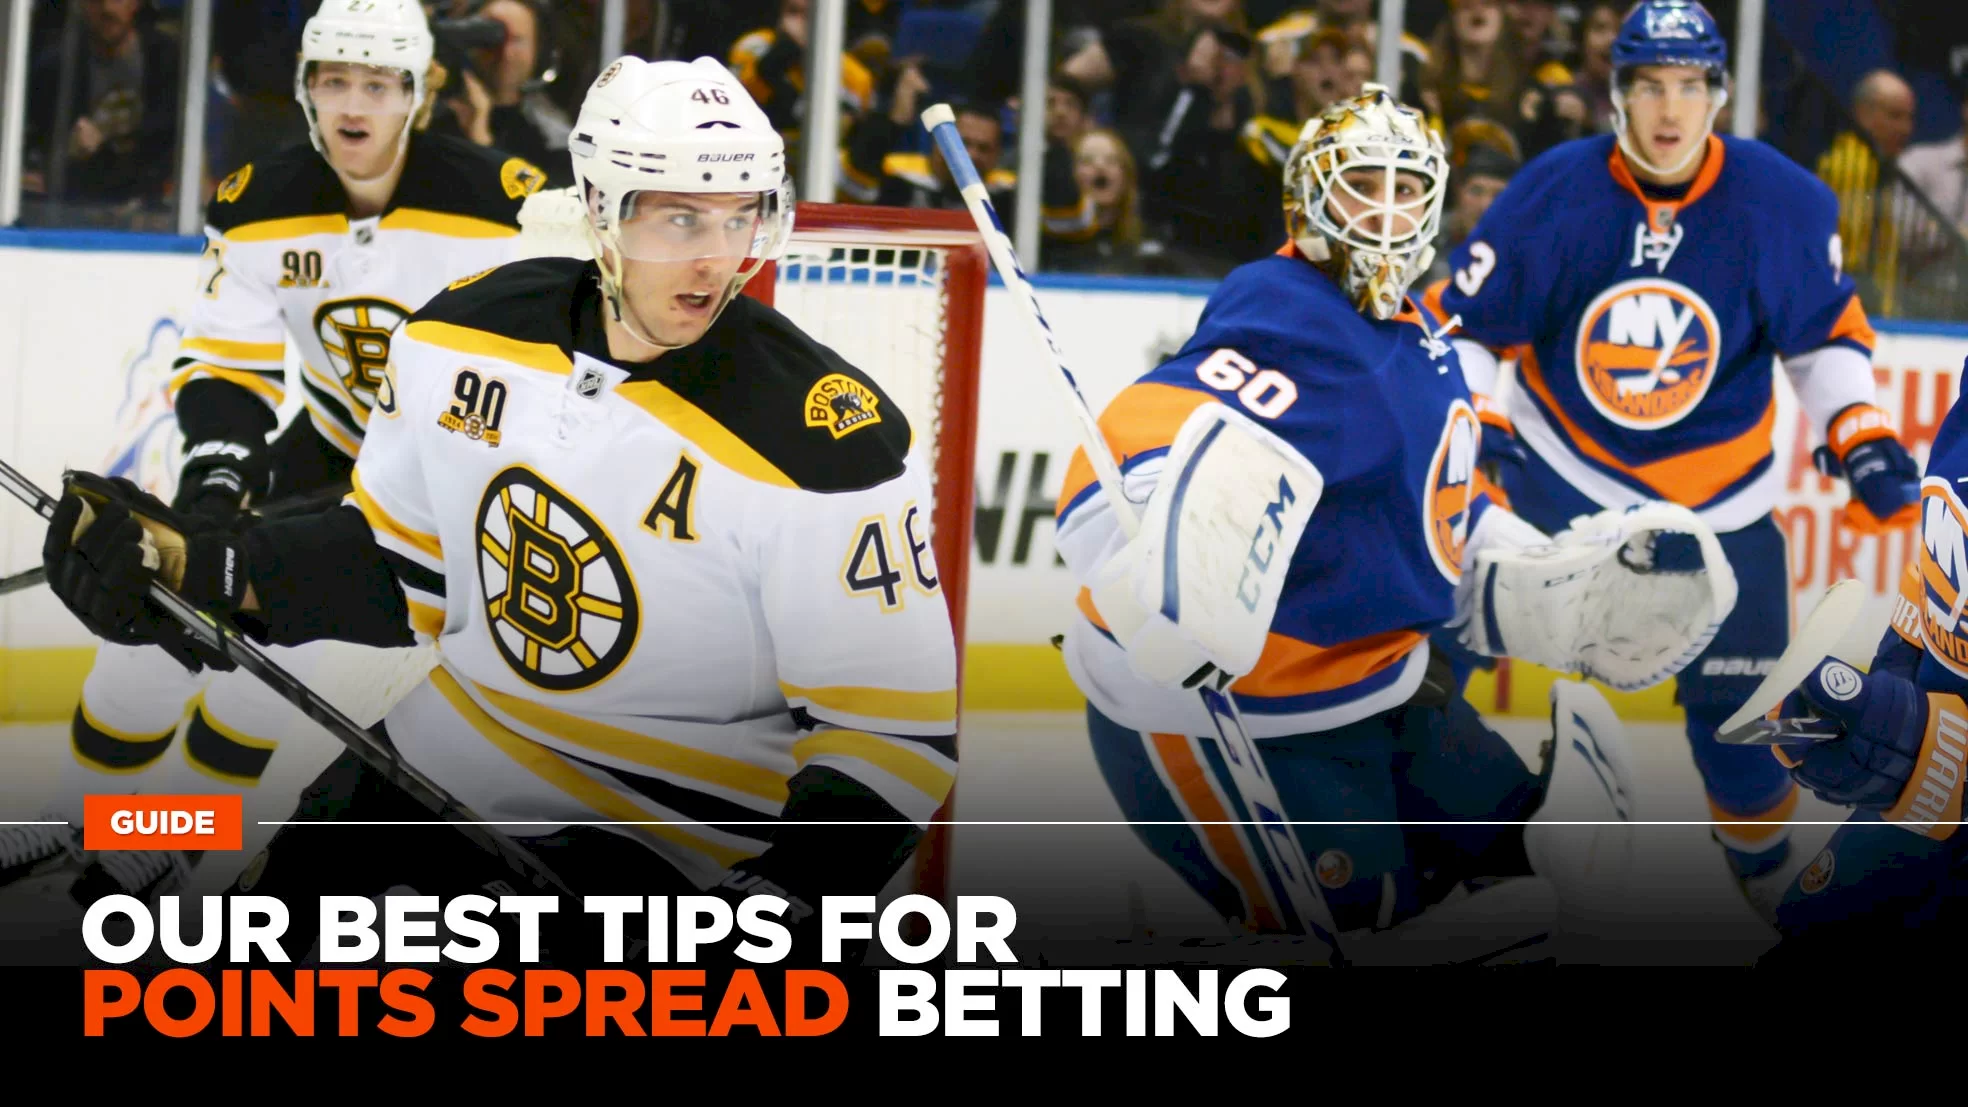 Tips for points spread betting